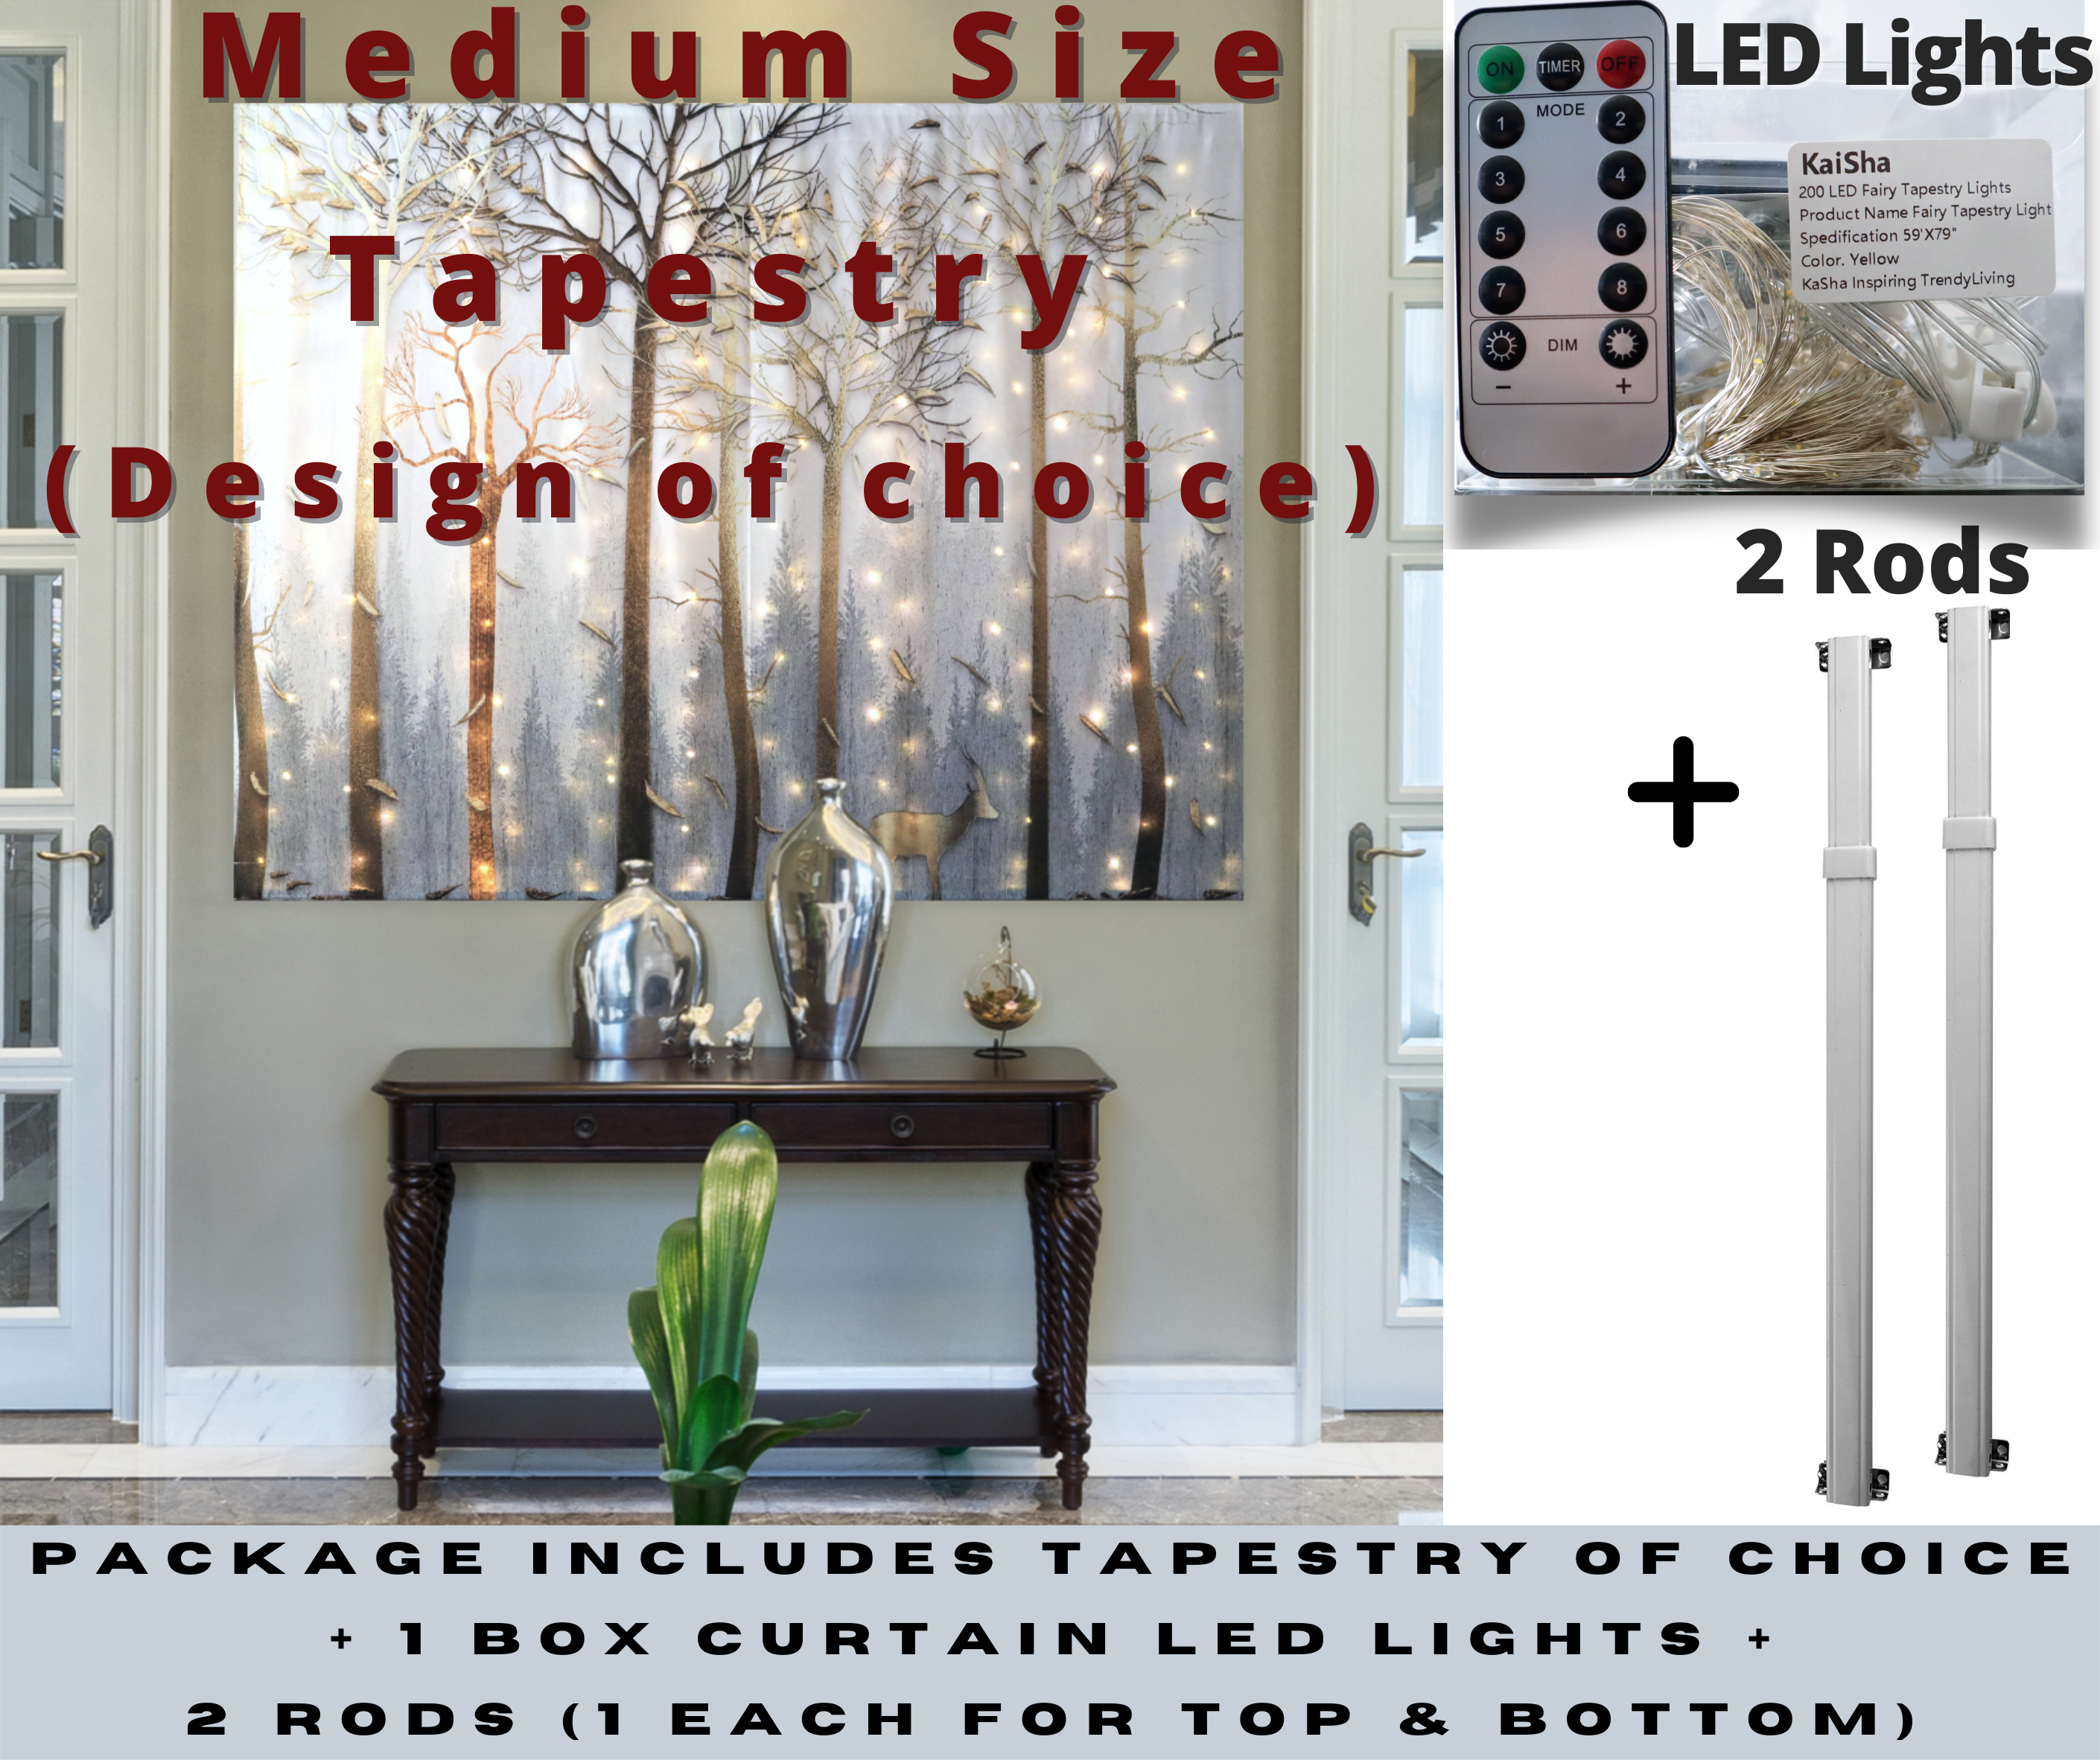 KaiSha LED Tapestry Bundle; MEDIUM SIZE; Tapestry+ LED Lights+ 2 Rods; Aesthetic Tapestries Wall Accent Backdrops Modern